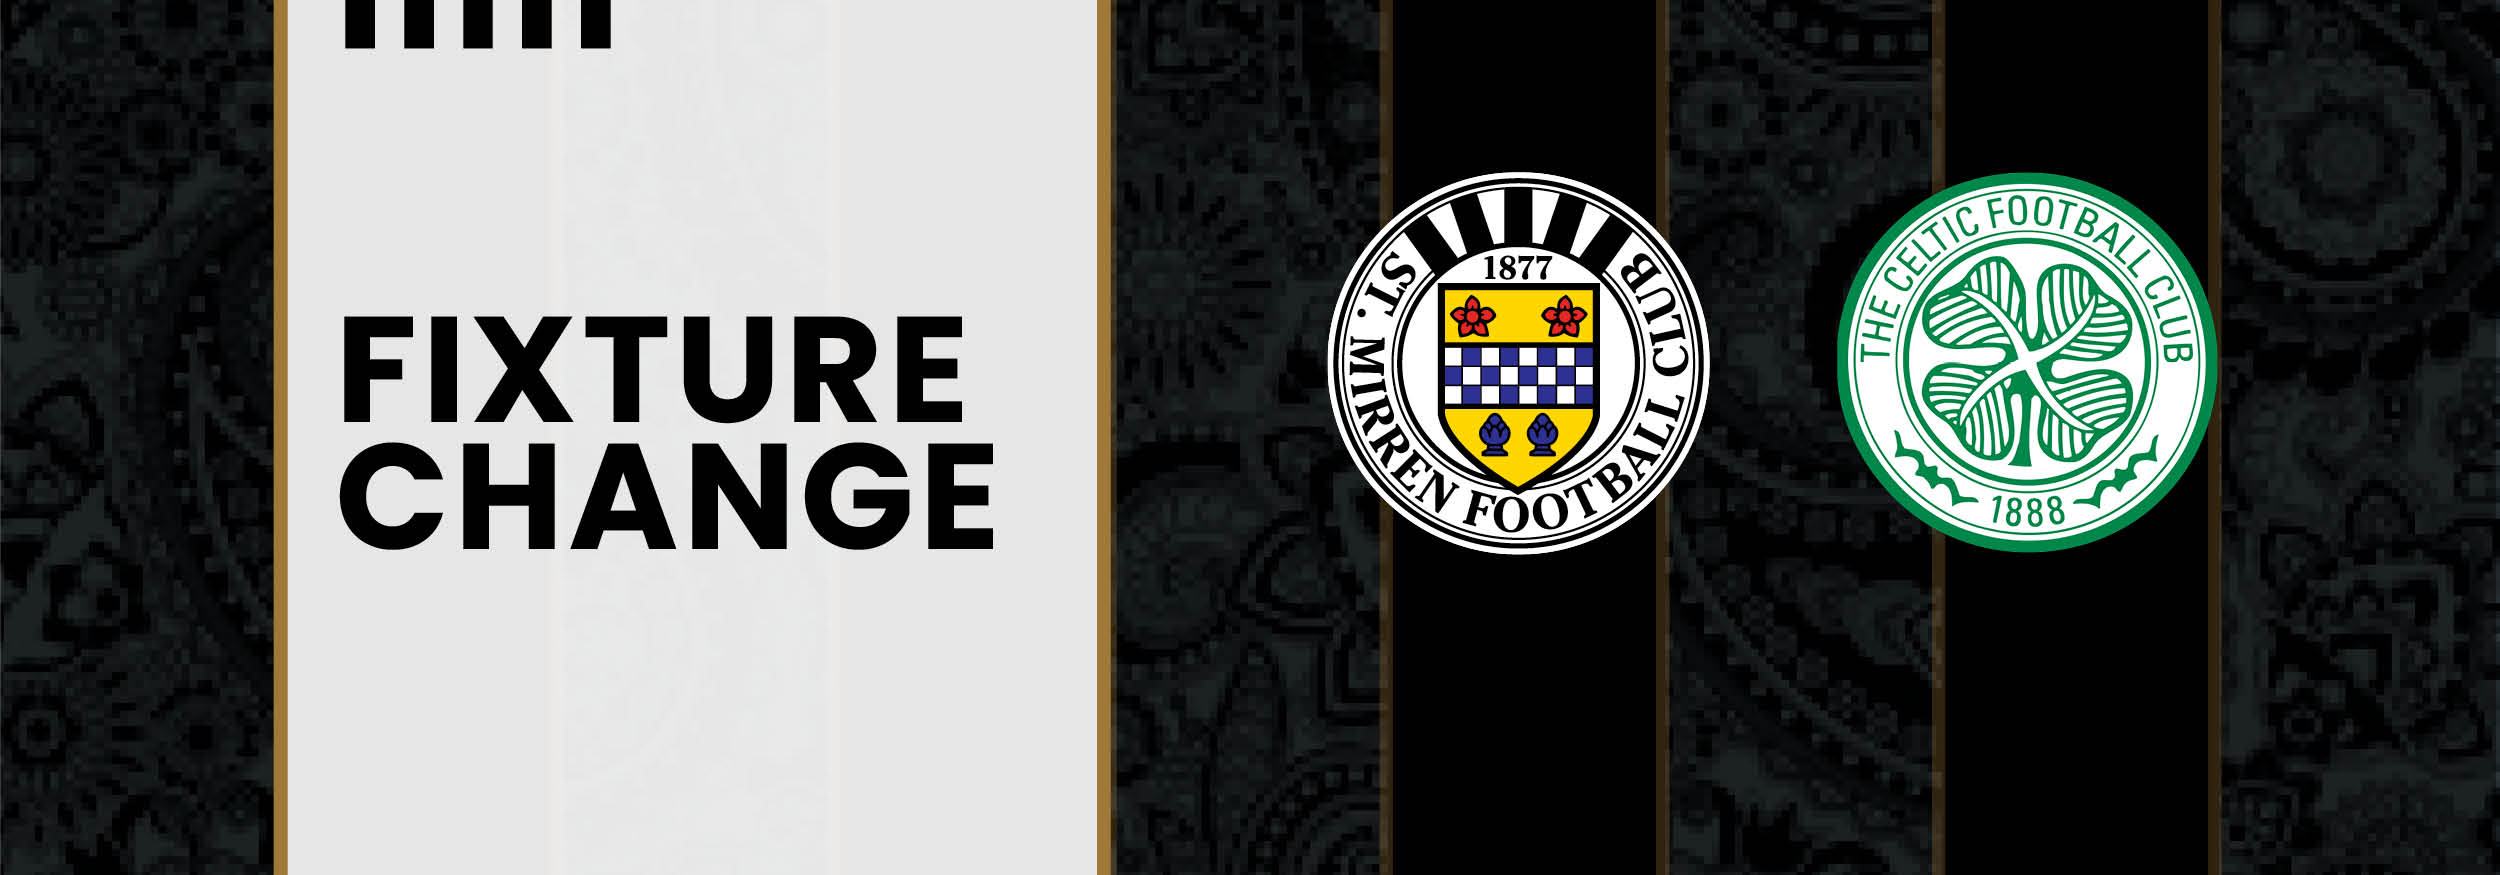 FIXTURE AMENDMENT | Our fixture against Celtic moved for Sky Sports Coverage